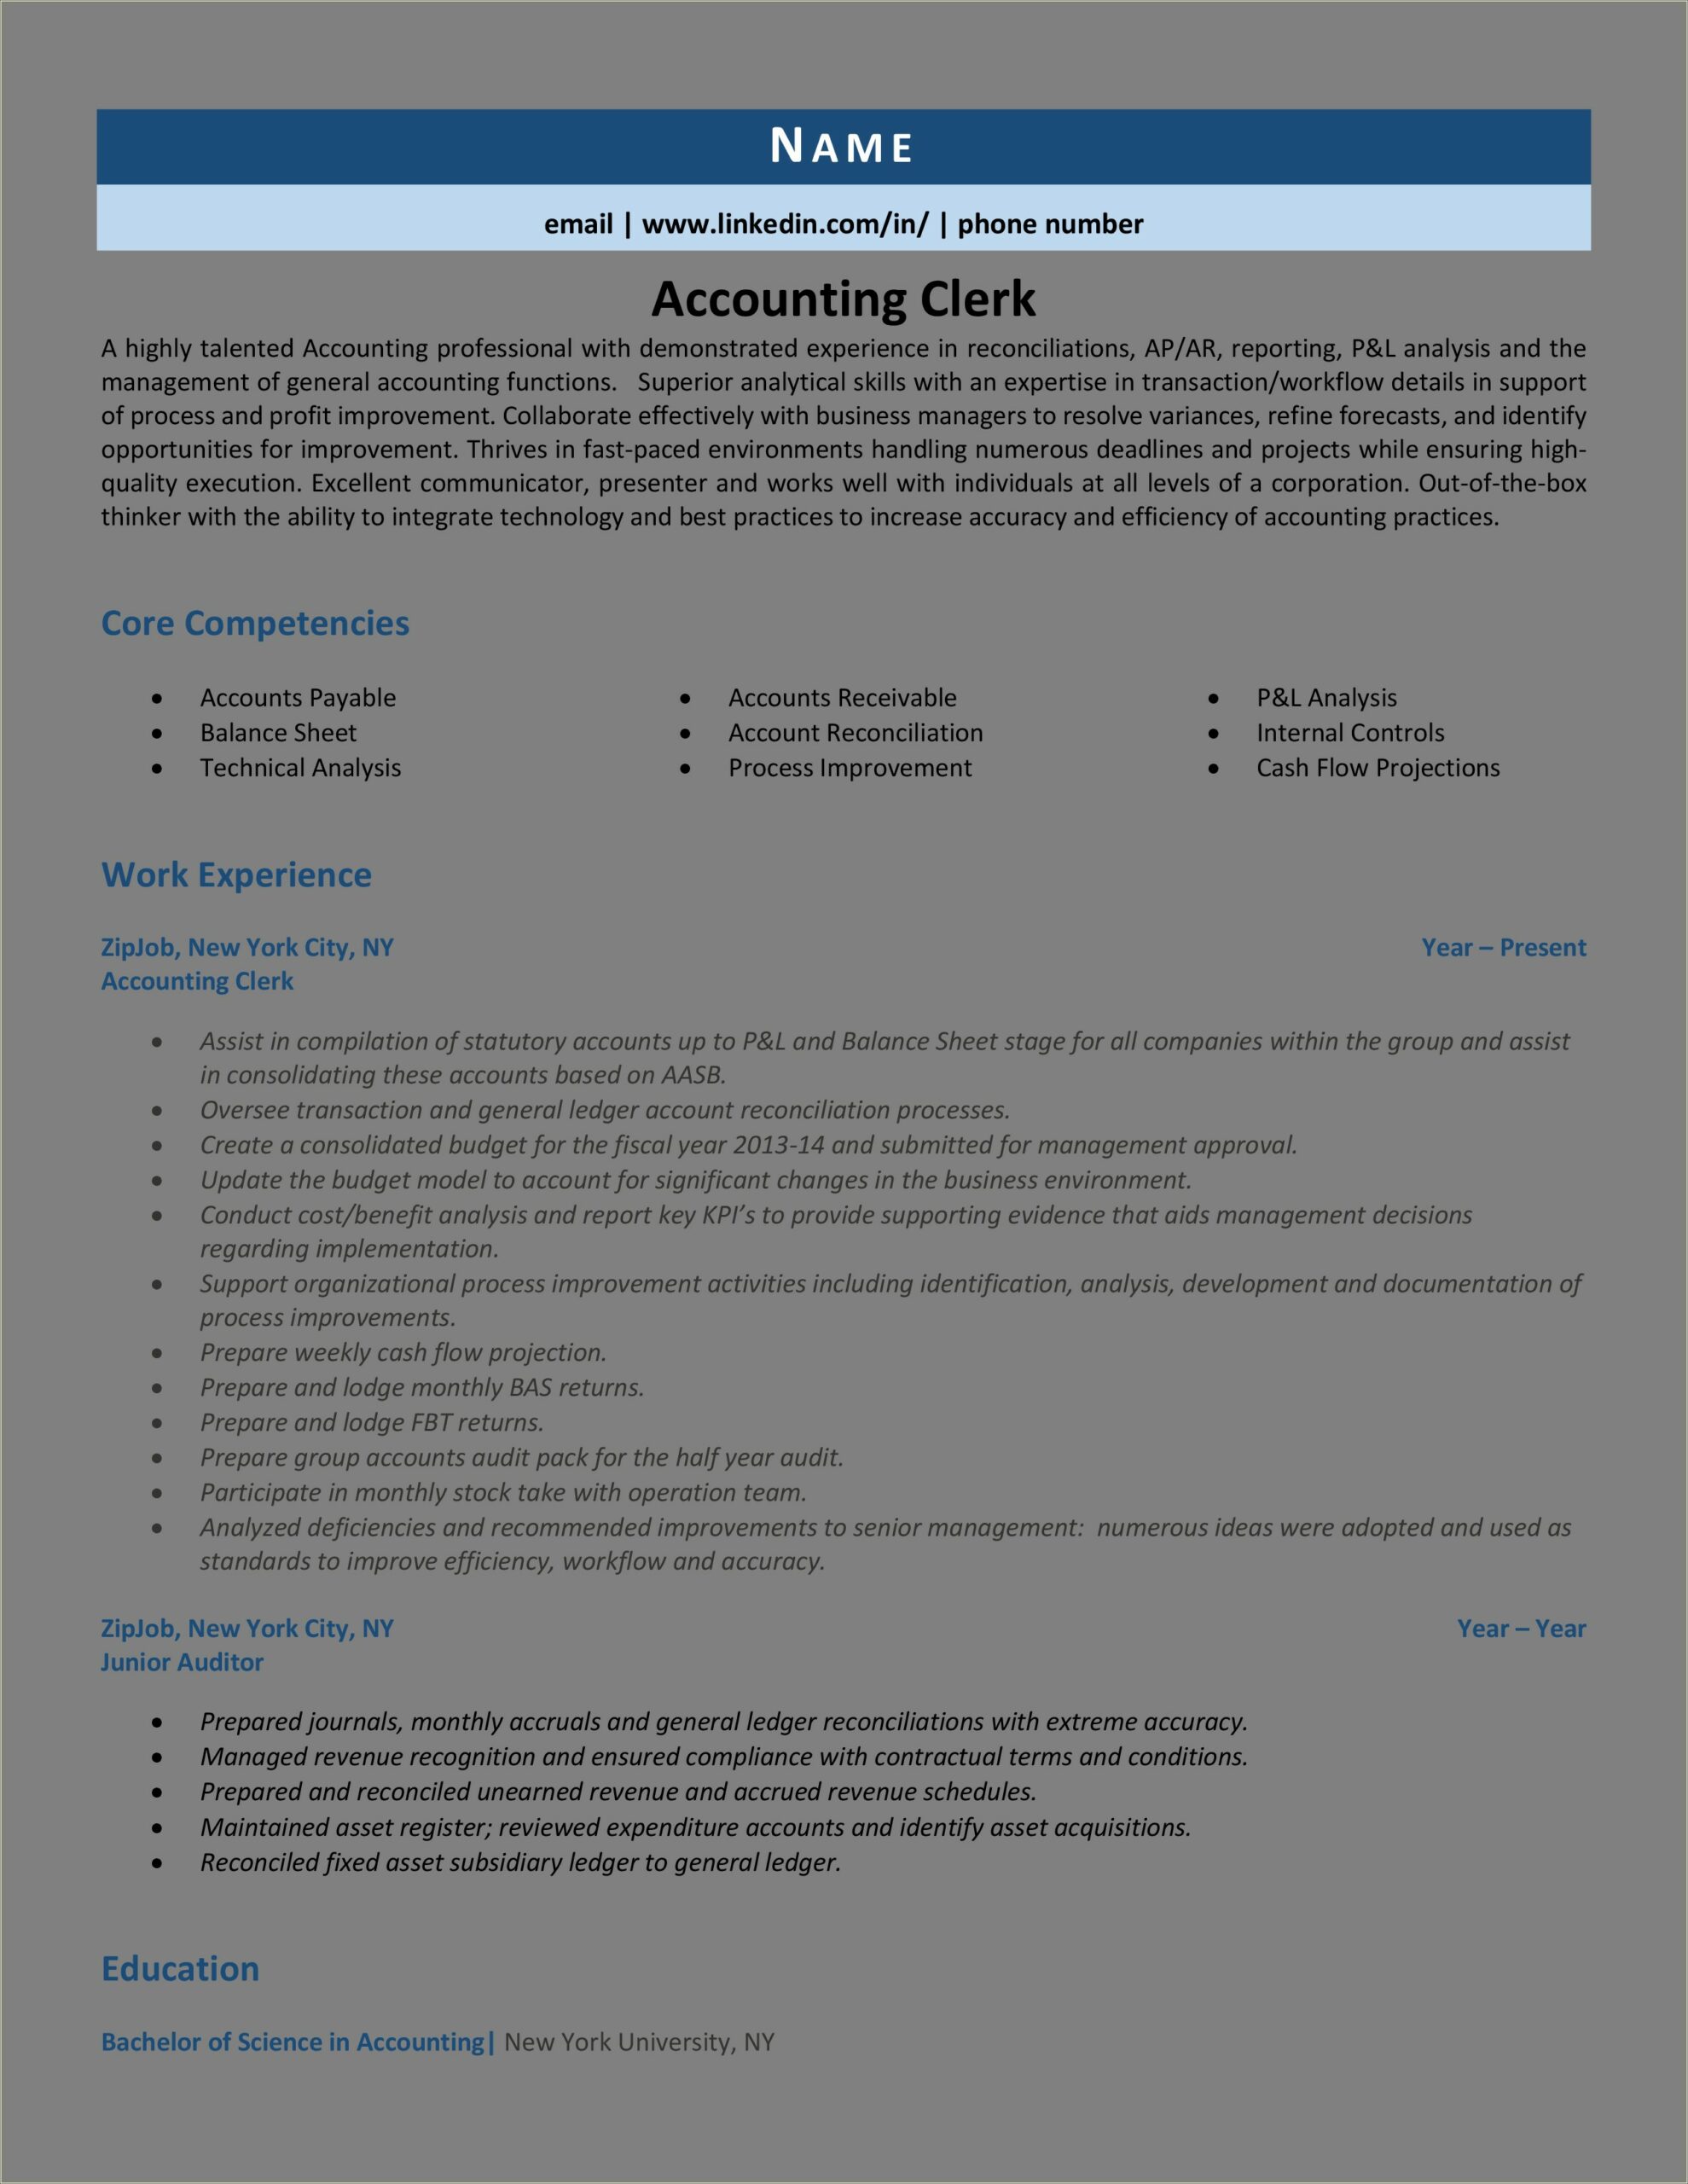 Sample Resume For Accounting Clerk With No Experience